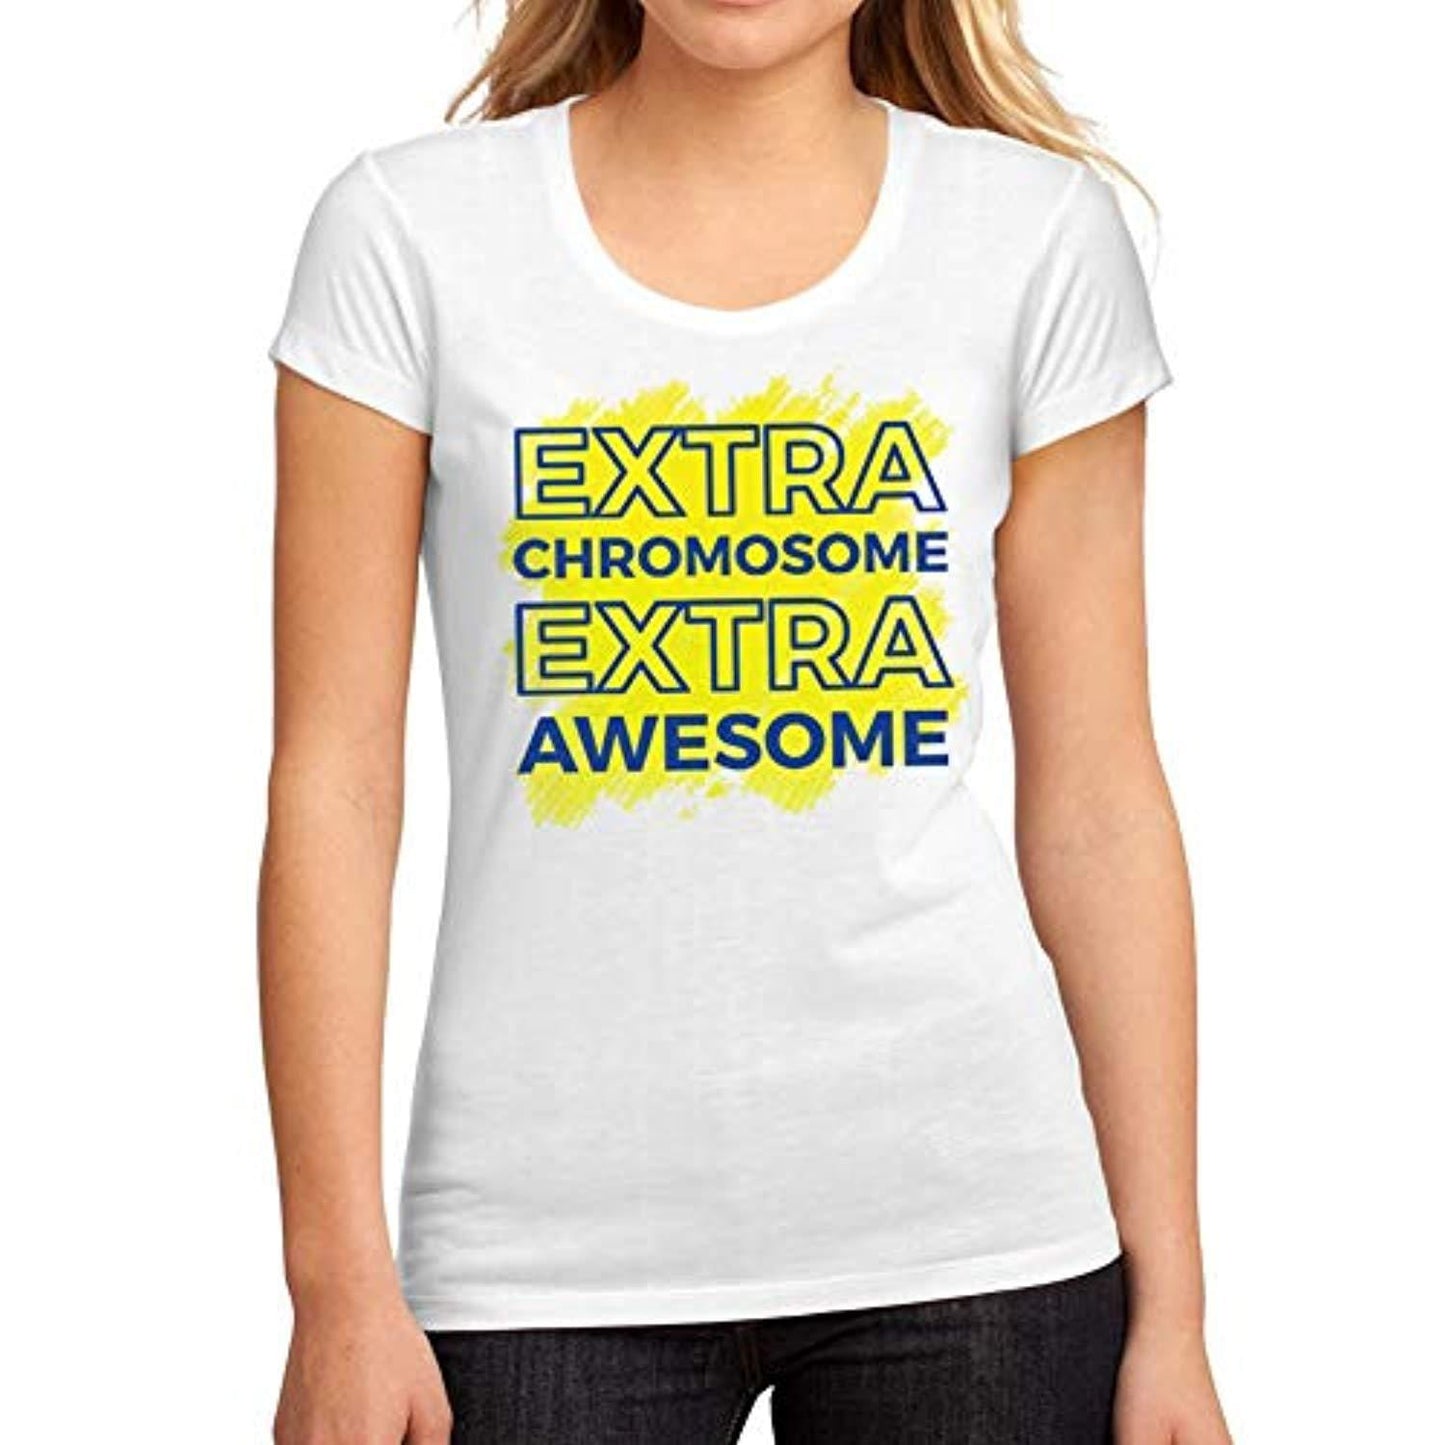 Women's Graphic T-Shirt Down Syndrome Extra Chromosome Extra Awesome White